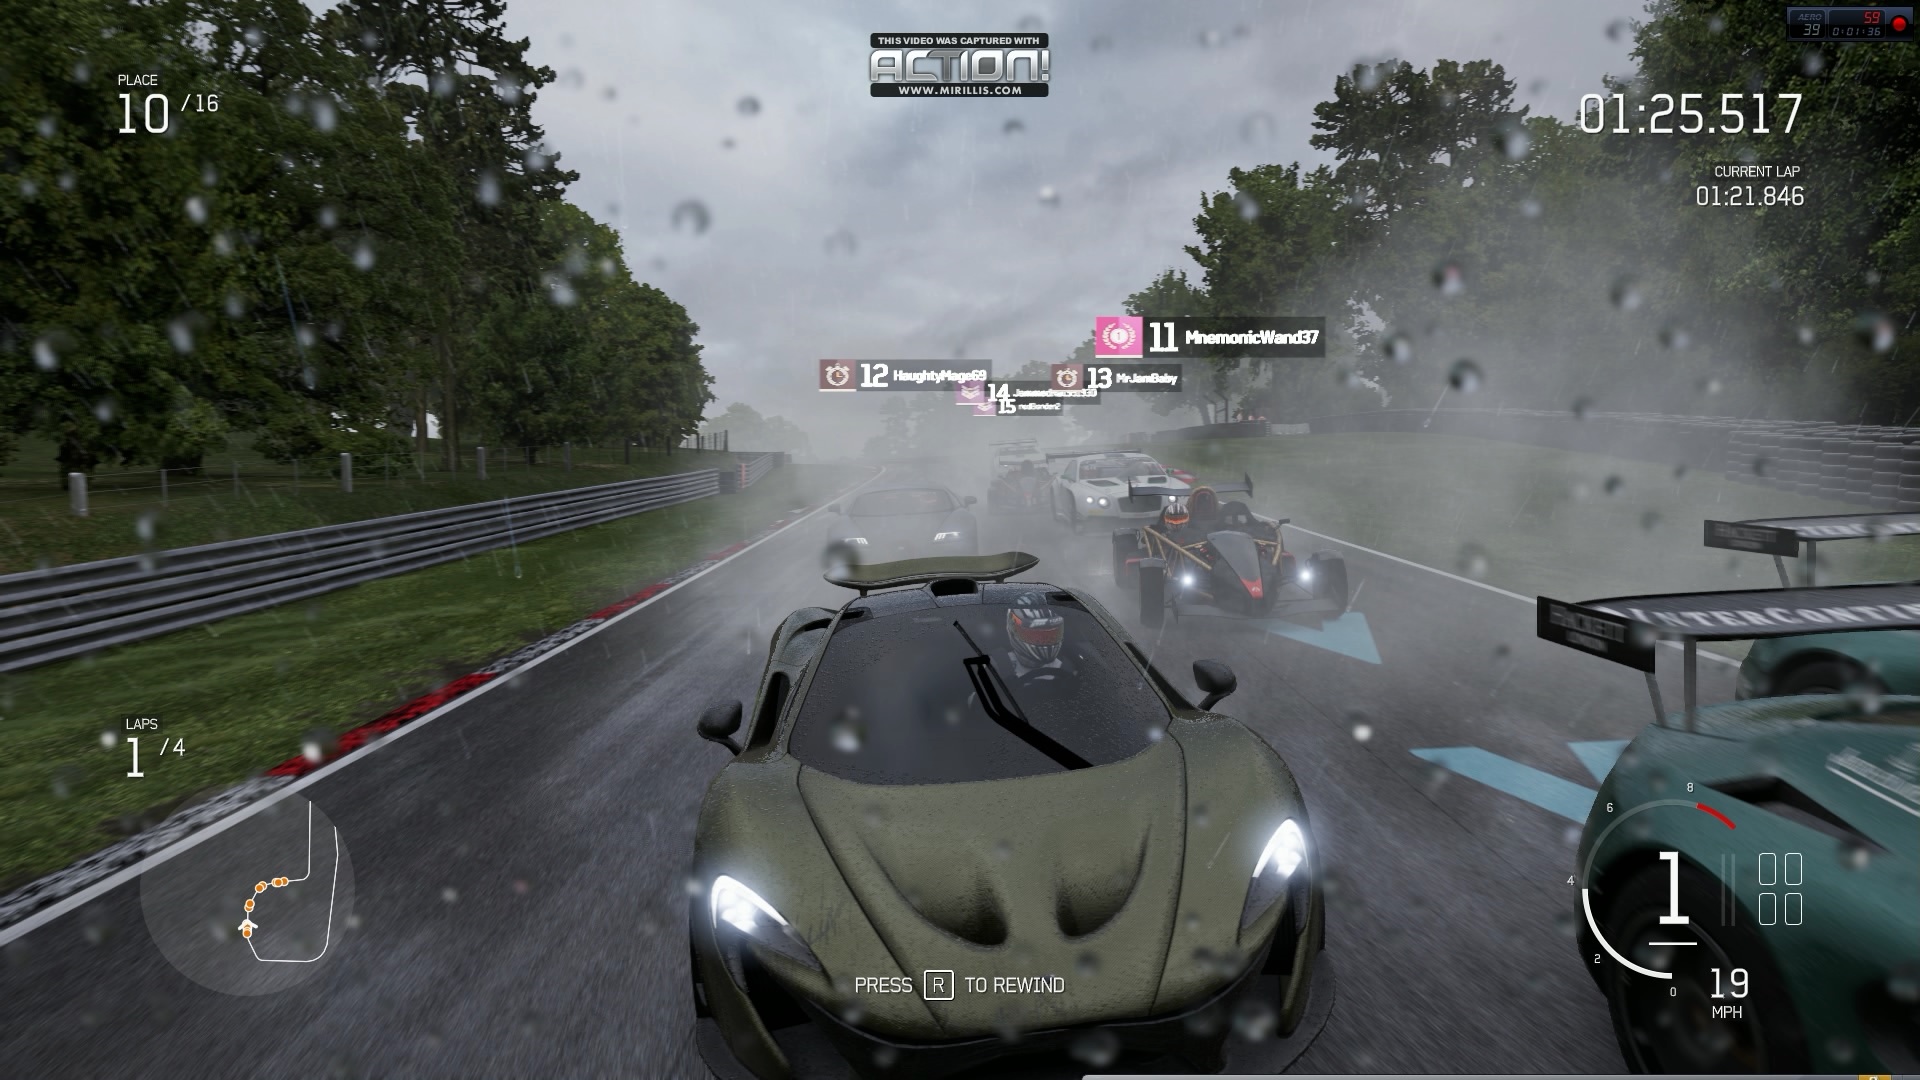 forza motorsport 6 is a video game